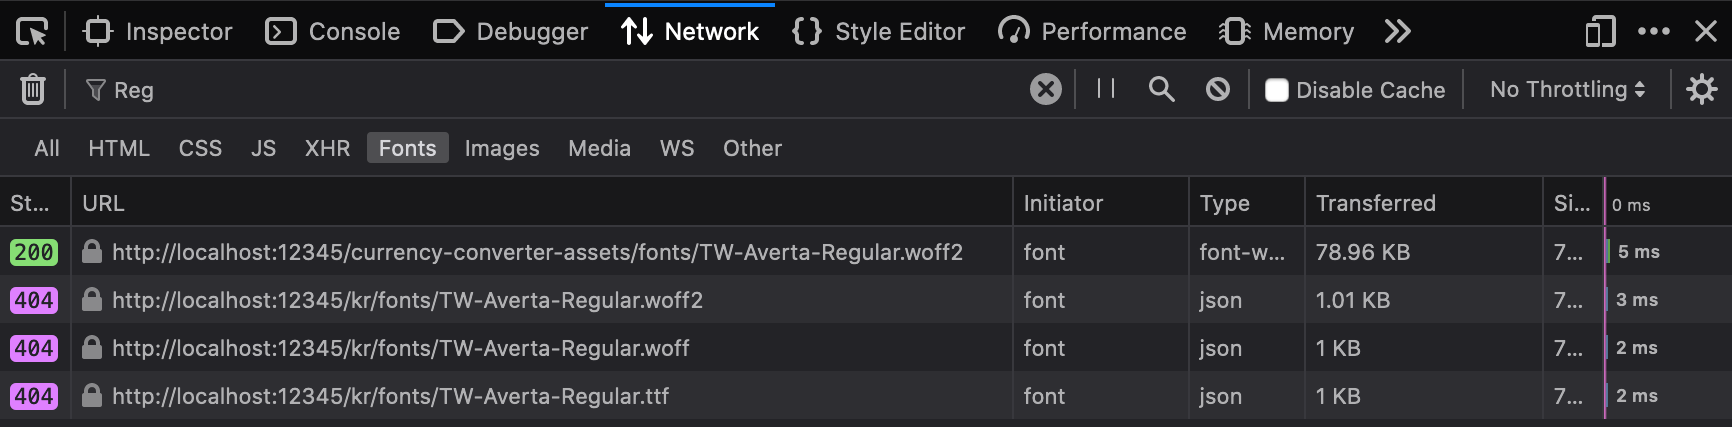 image of network tab showing a 200 response for Averta.woff2, and then a 404 for Averta.woff2, a 404 for Averta.woff, and a 404 for Averta.ttf